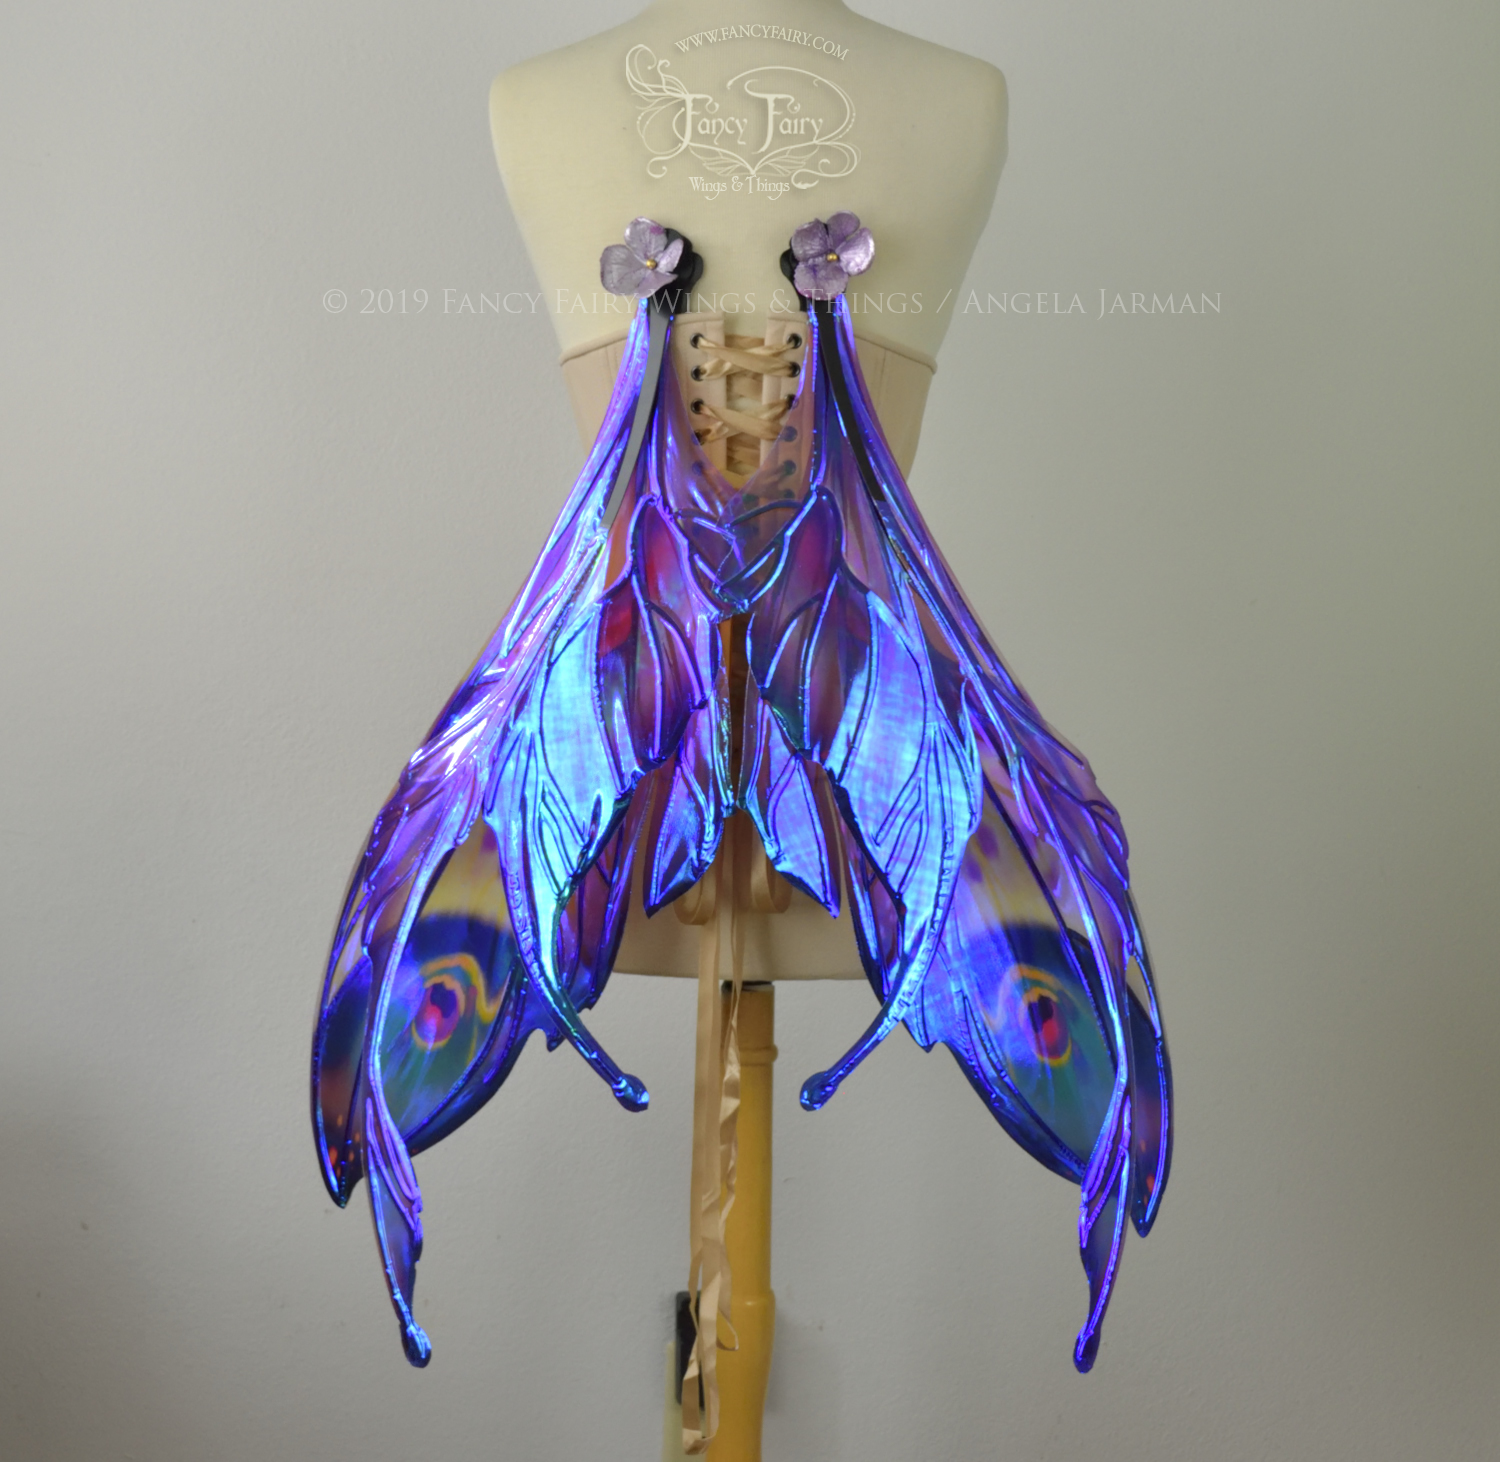 Back view of a dress form wearing an underbust corset & extra large iridescent fairy wings with mauve purple & blue color pattern , in resting position